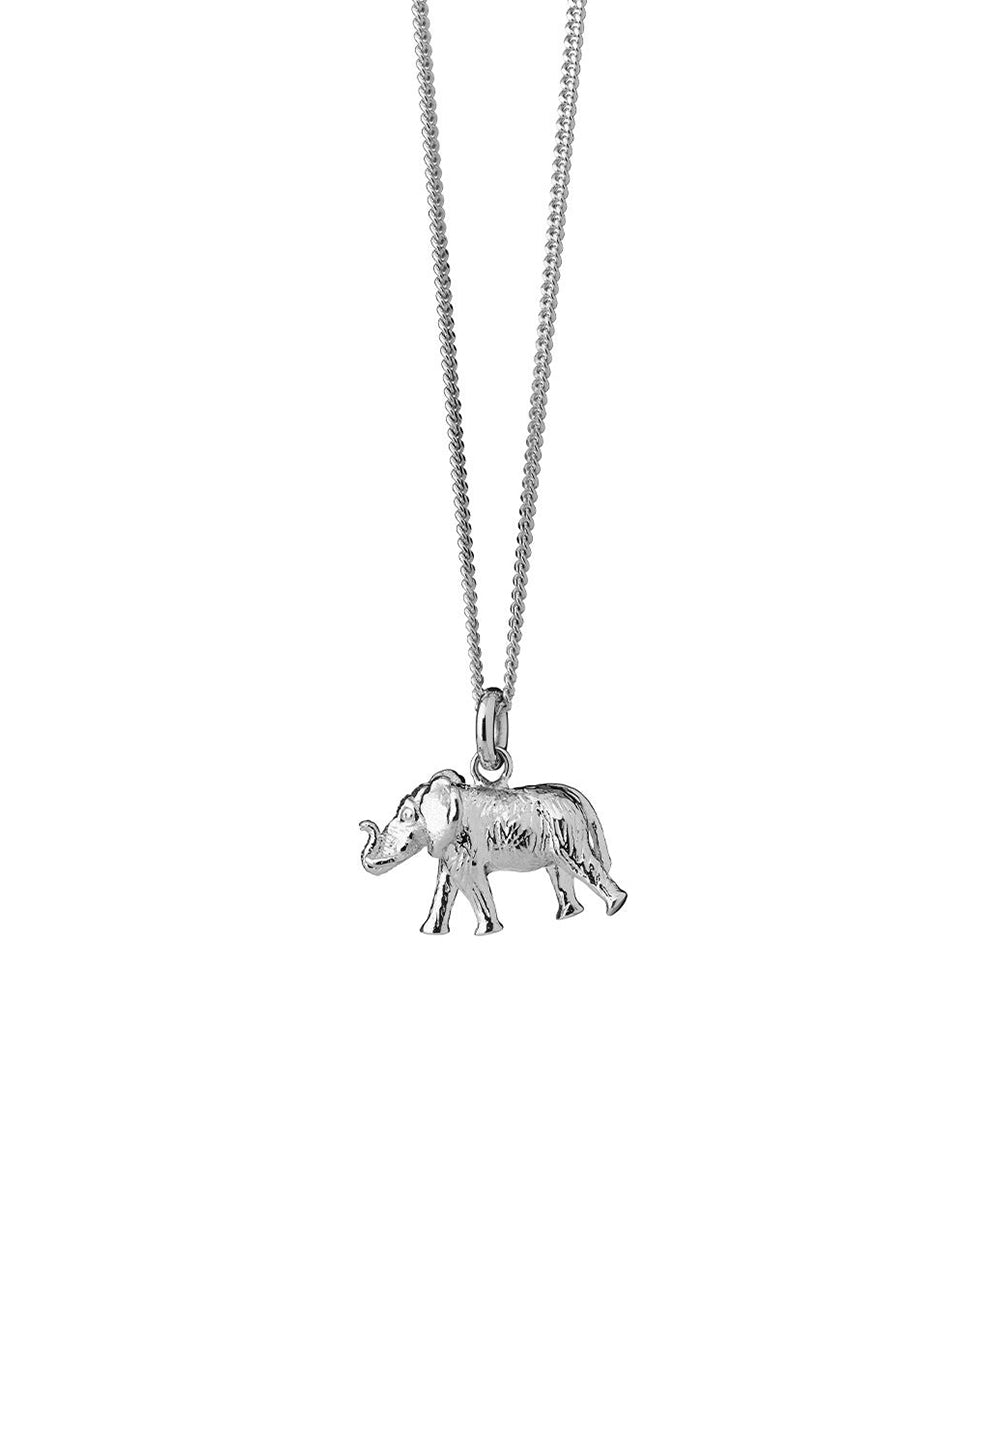 Elephant Necklace sold by Angel Divine